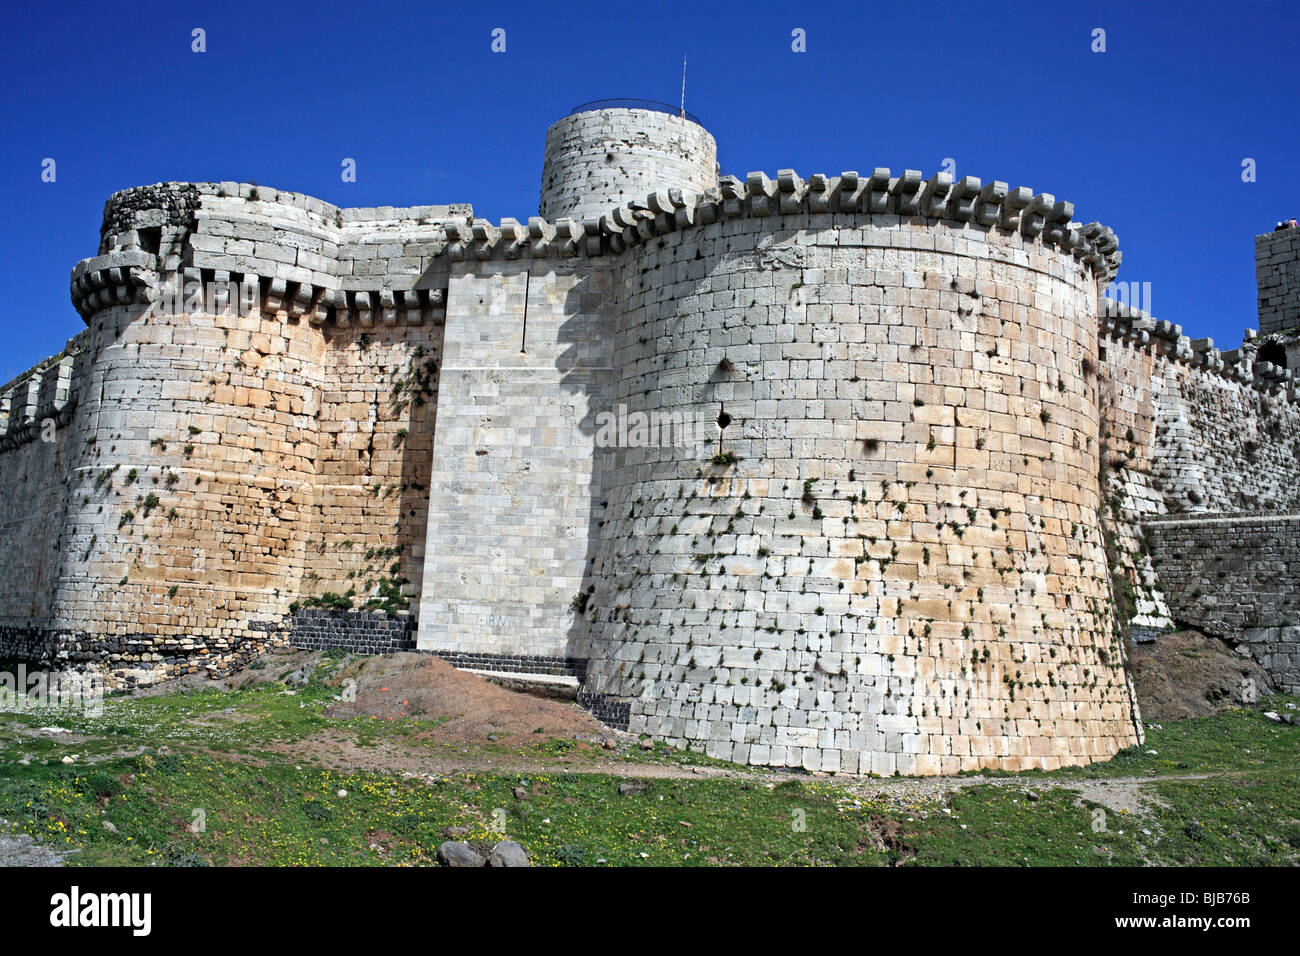 Crusaders castle Krak des Chevaliers (Castle of the Knights), Qalaat al Hosn, (1140-1260), Syria Stock Photo